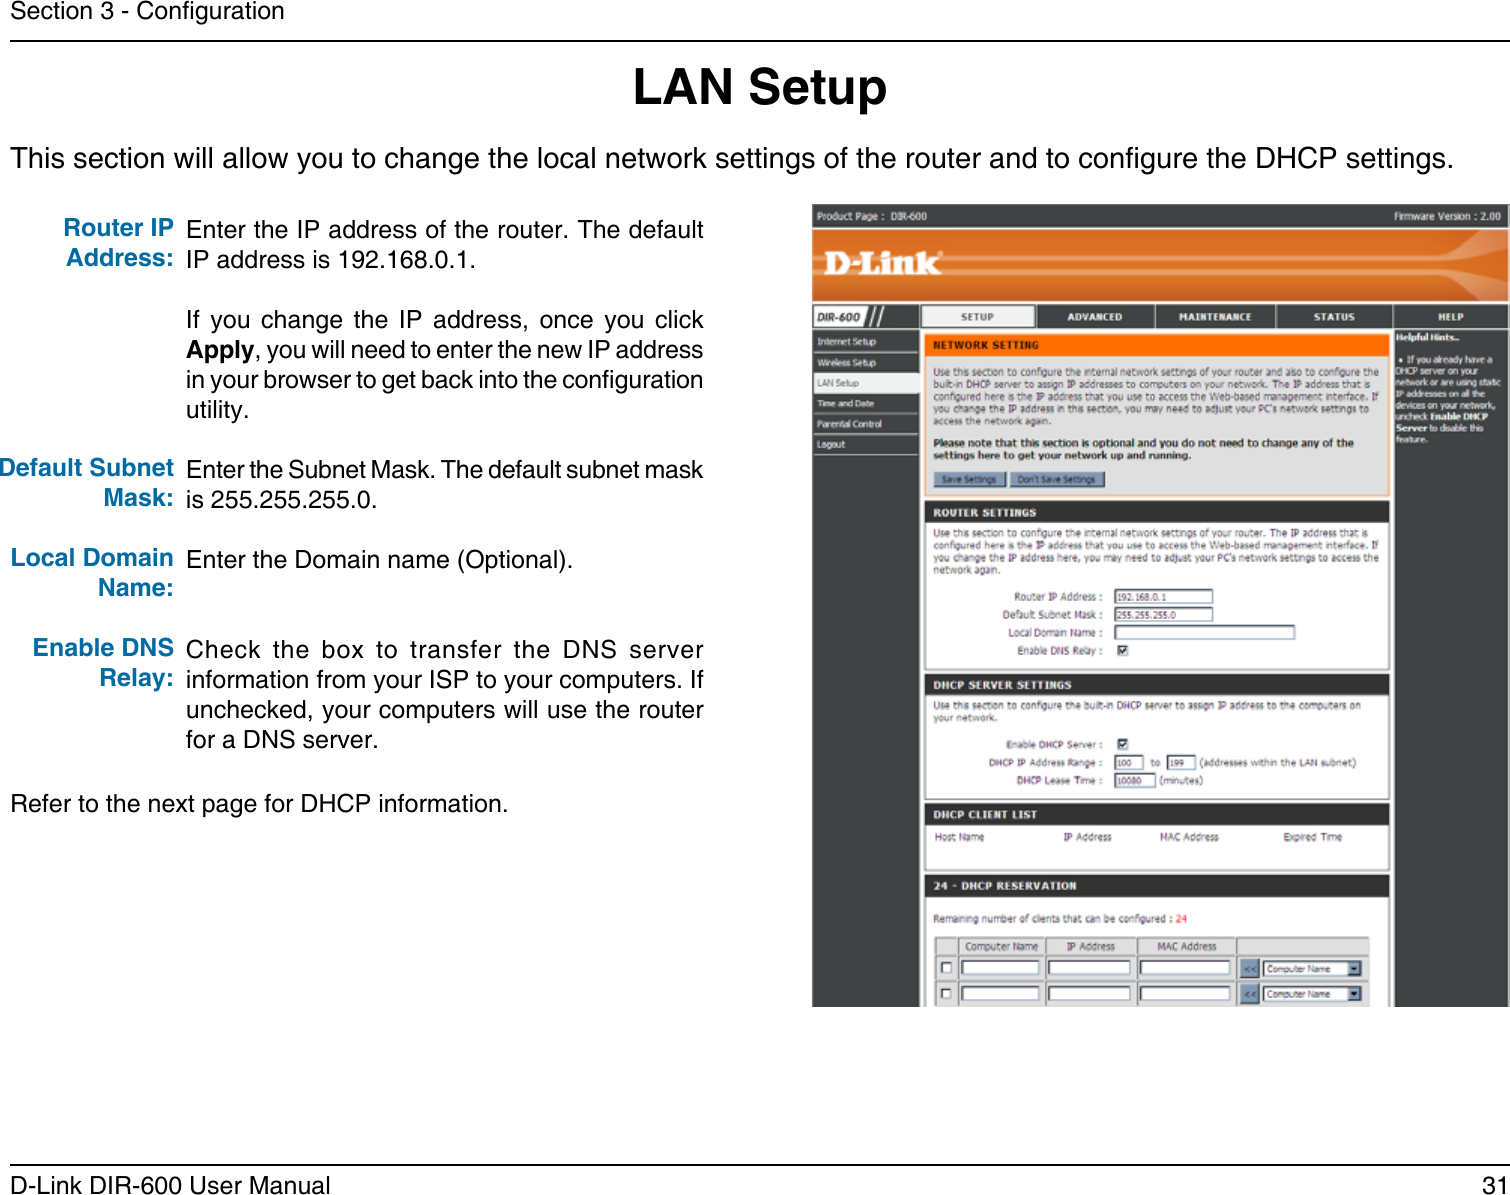 31D-Link DIR-600 User ManualSection 3 - CongurationThis section will allow you to change the local network settings of the router and to congure the DHCP settings.LAN SetupEnter the IP address of the router. The default IP address is 192.168.0.1.If  you  change  the  IP  address,  once  you  click Apply, you will need to enter the new IP address in your browser to get back into the conguration utility.Enter the Subnet Mask. The default subnet mask is 255.255.255.0.Enter the Domain name (Optional).Check  the  box  to  transfer  the  DNS  server information from your ISP to your computers. If unchecked, your computers will use the router for a DNS server.Router IP Address:Default Subnet Mask:Local Domain Name:Enable DNS Relay:Refer to the next page for DHCP information.